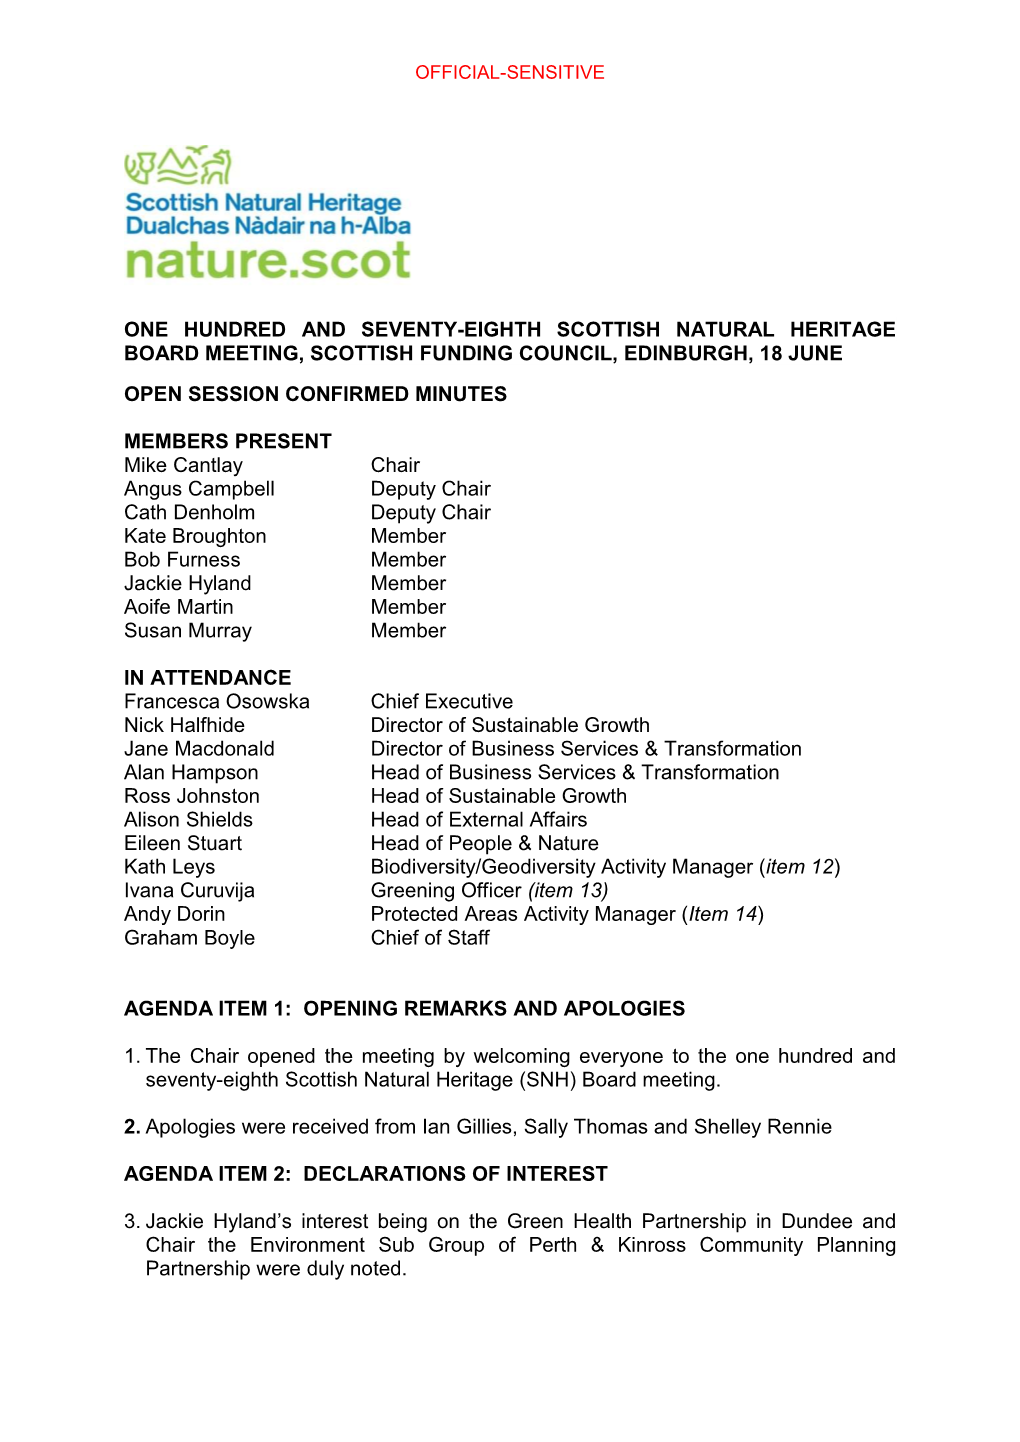 One Hundred and Seventy-Eighth Scottish Natural Heritage Board Meeting, Scottish Funding Council, Edinburgh, 18 June Open Session Confirmed Minutes